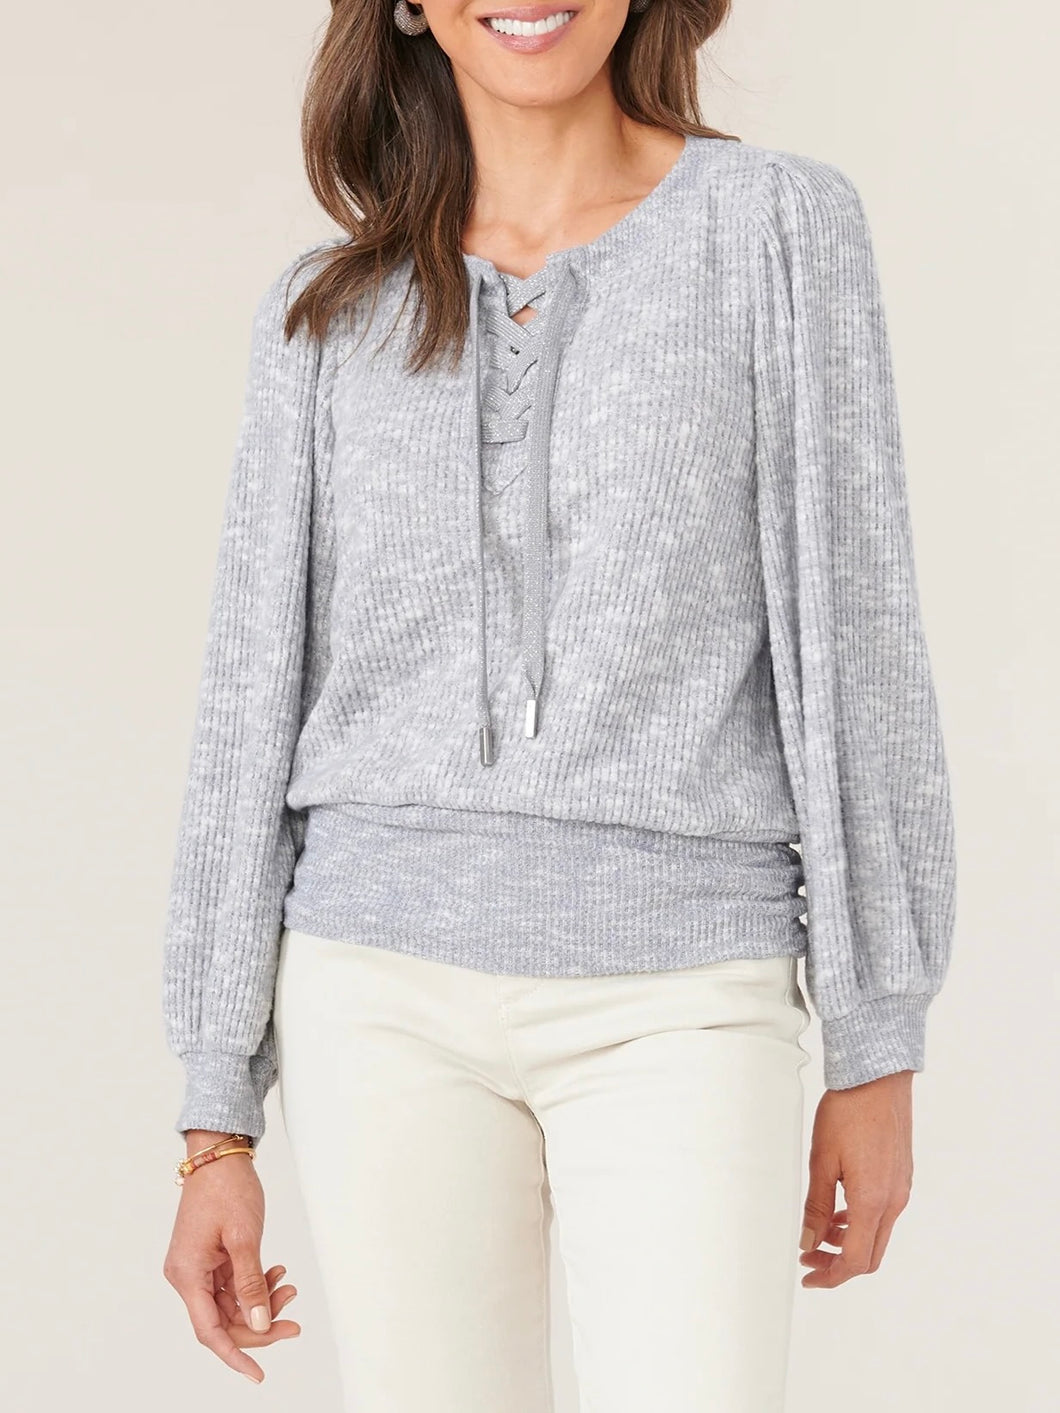 Lace-Up Thermal Top - Heather Slate